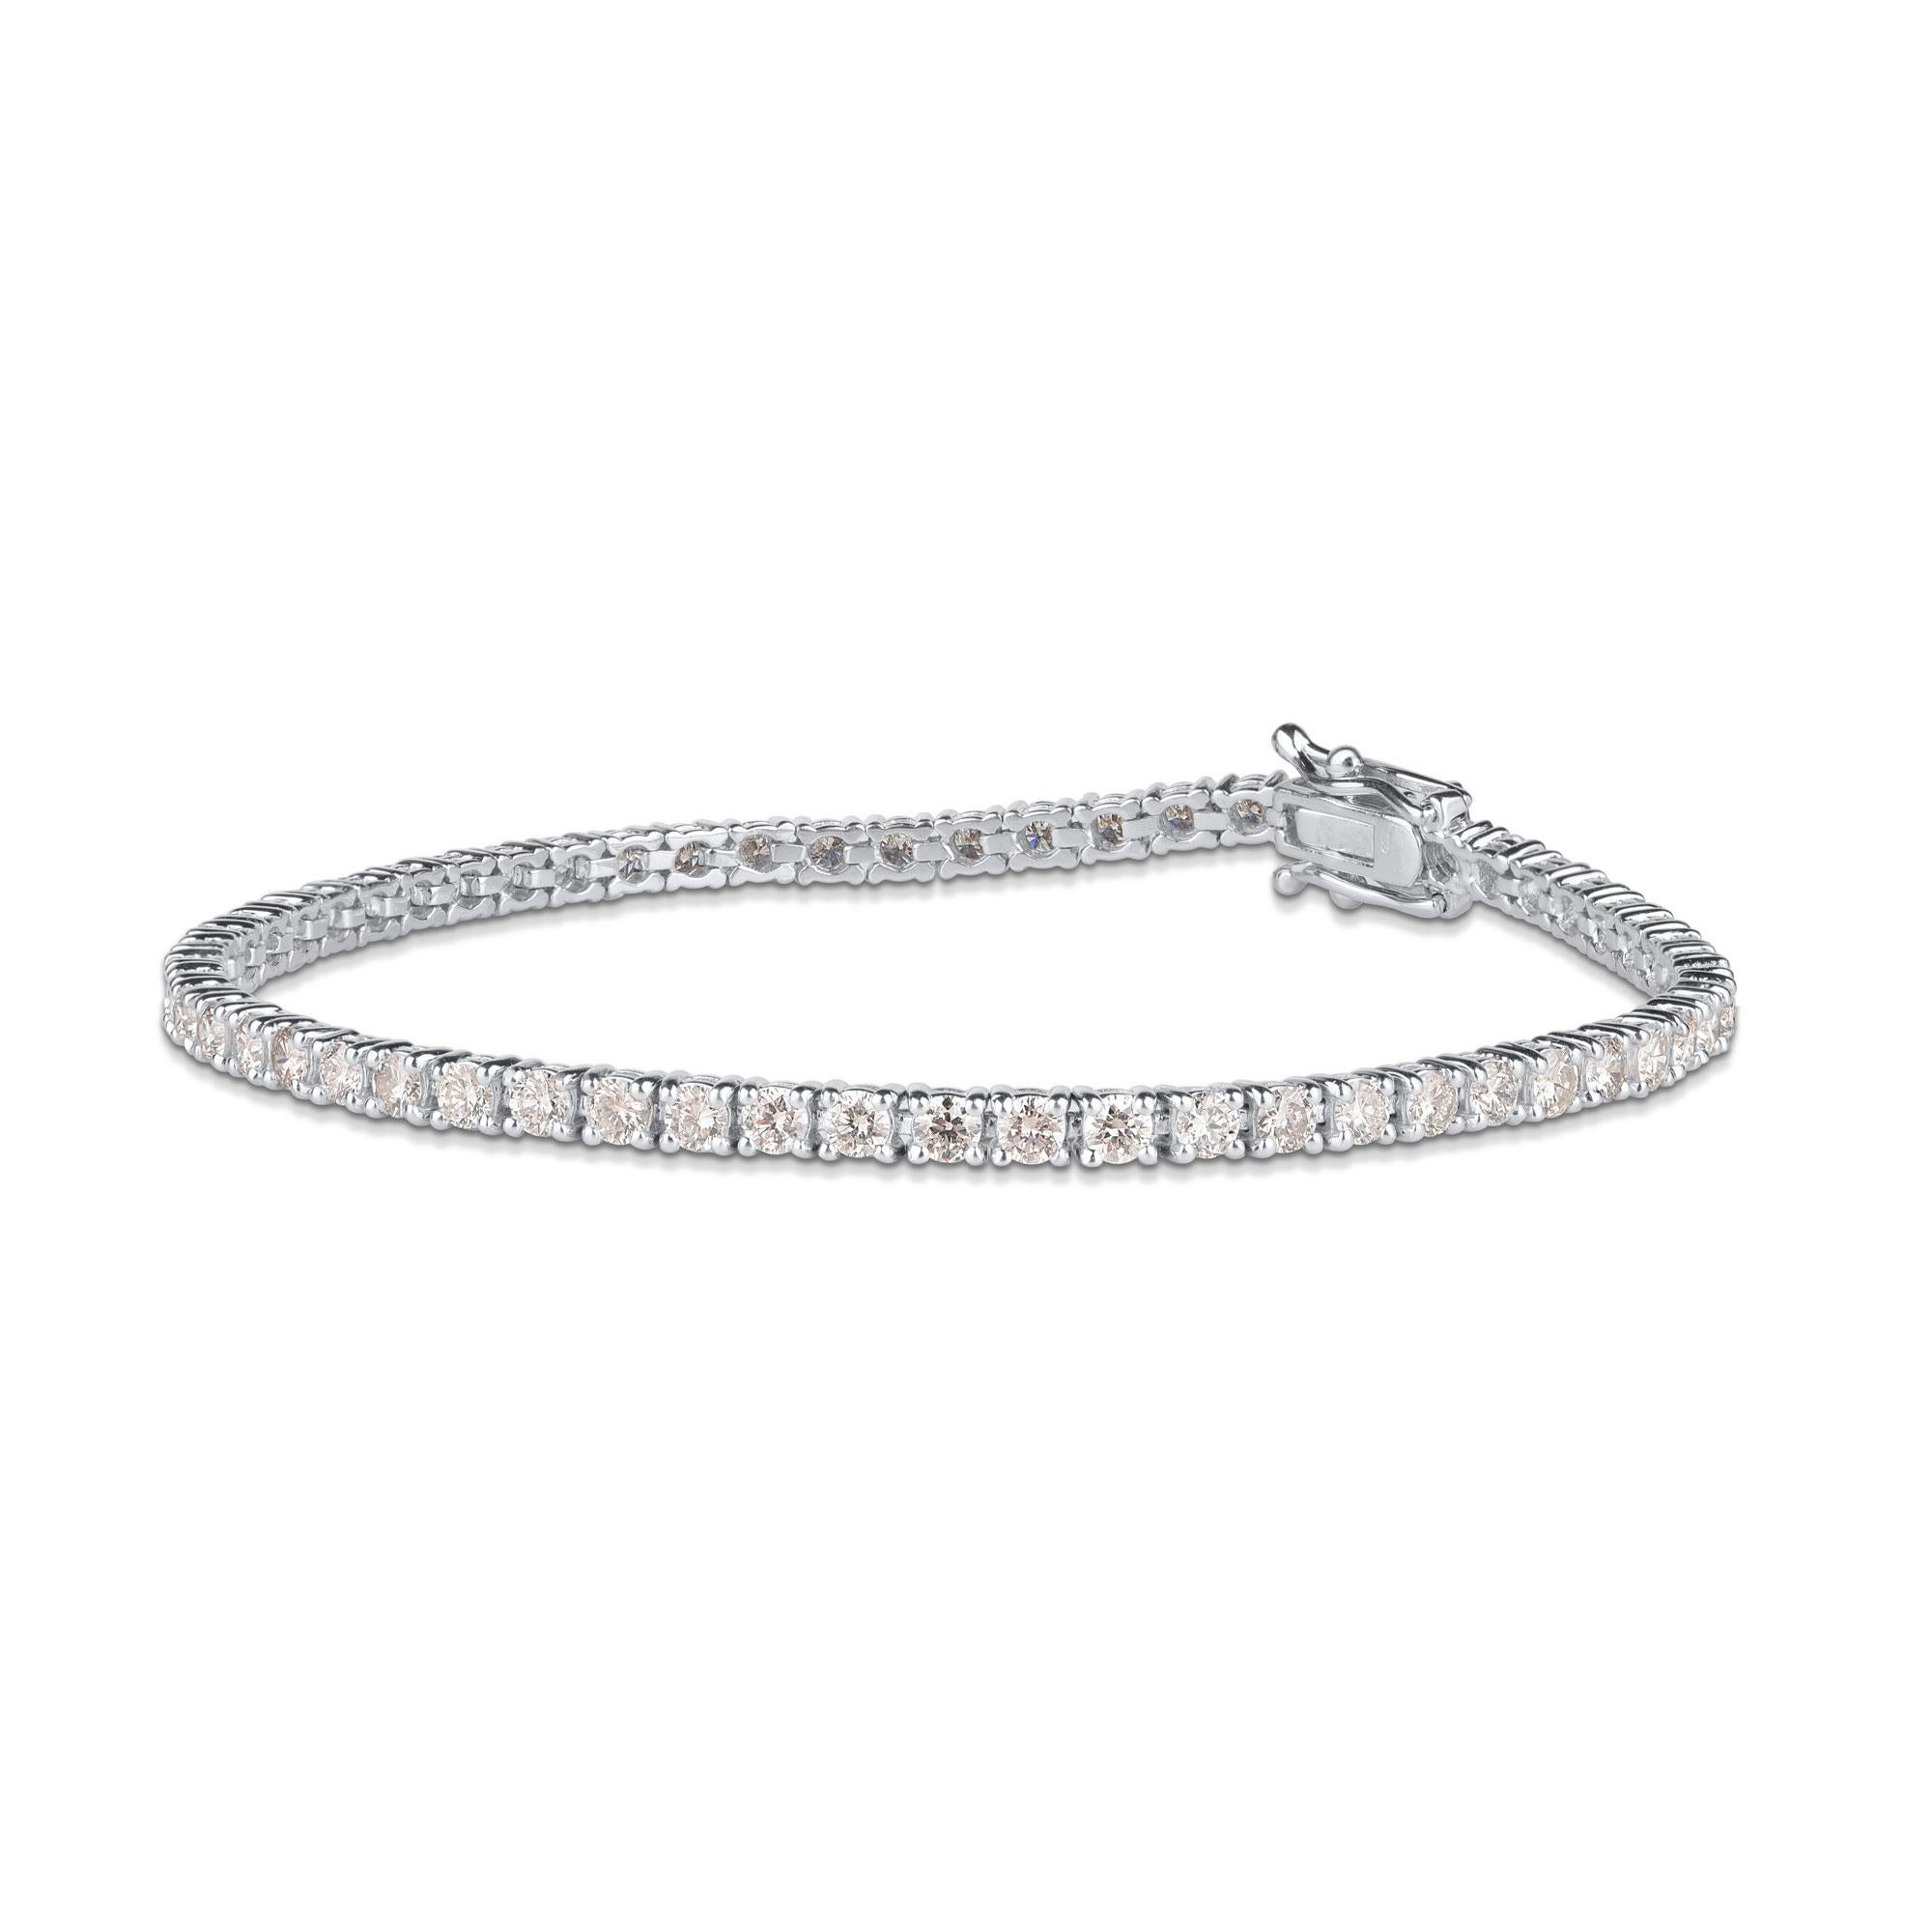 A modern take on a classic look, this diamond tennis bracelet is just your look. Featuring 75 round brilliant-cut natural diamond embellished in prong setting. The total weight of diamond is 2.50 Carat and it shine with H-I color I2 clarity
